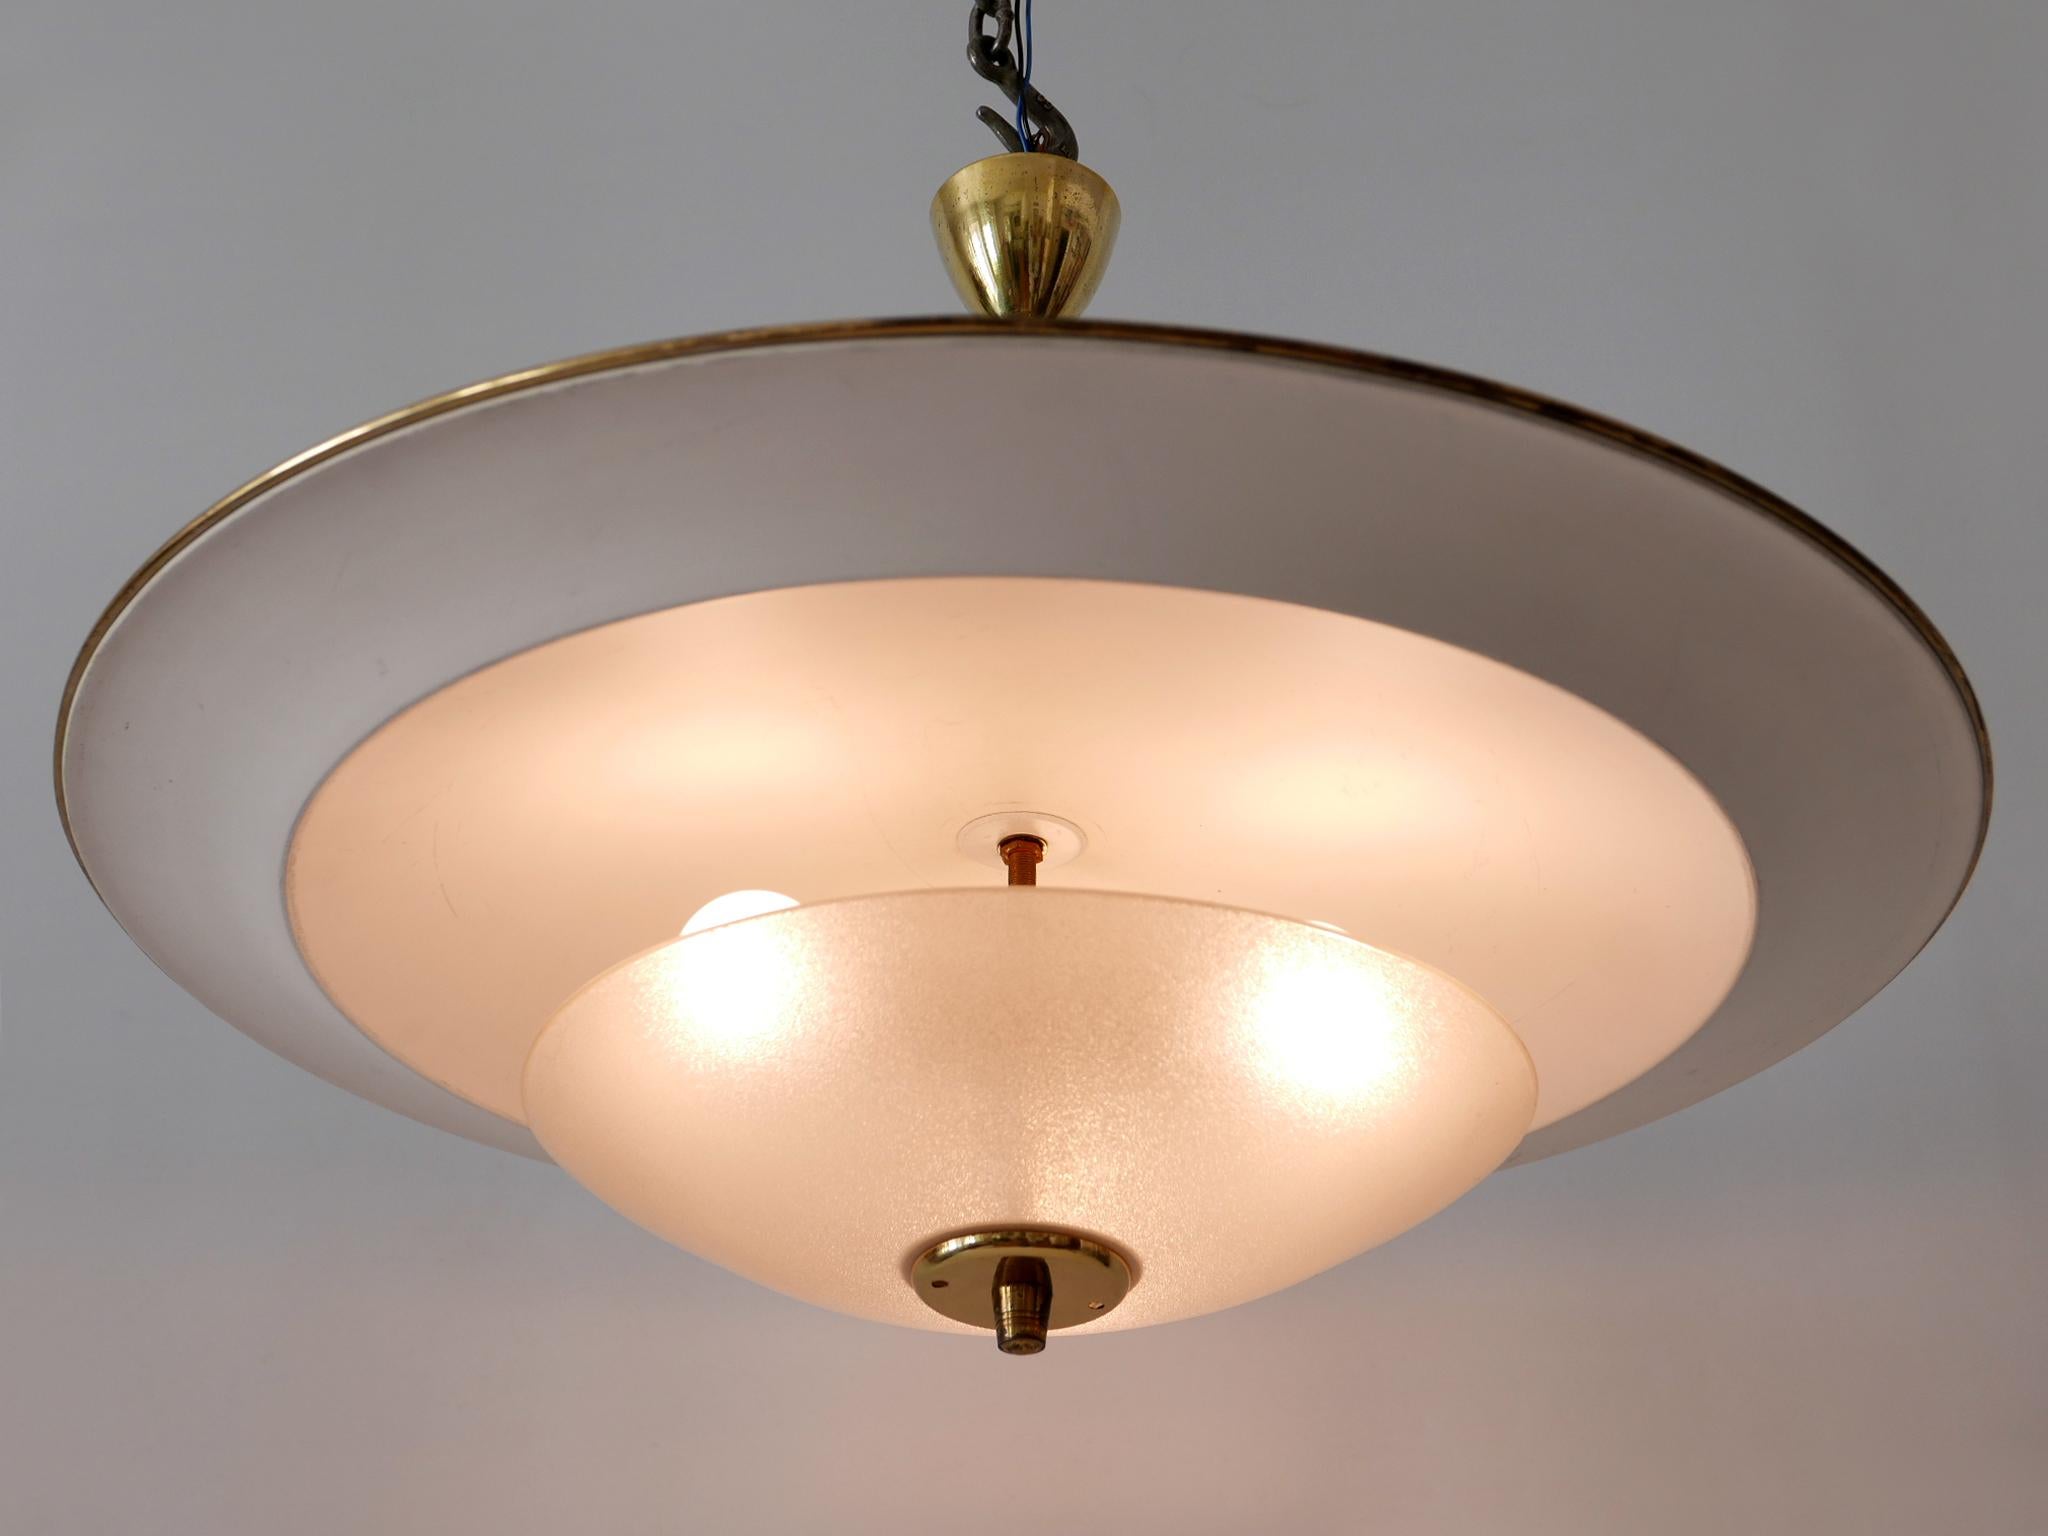 Large Mid-Century Modern 'Ufo' Ceiling Light or Pendant Lamp Germany 1950s № 1 For Sale 7